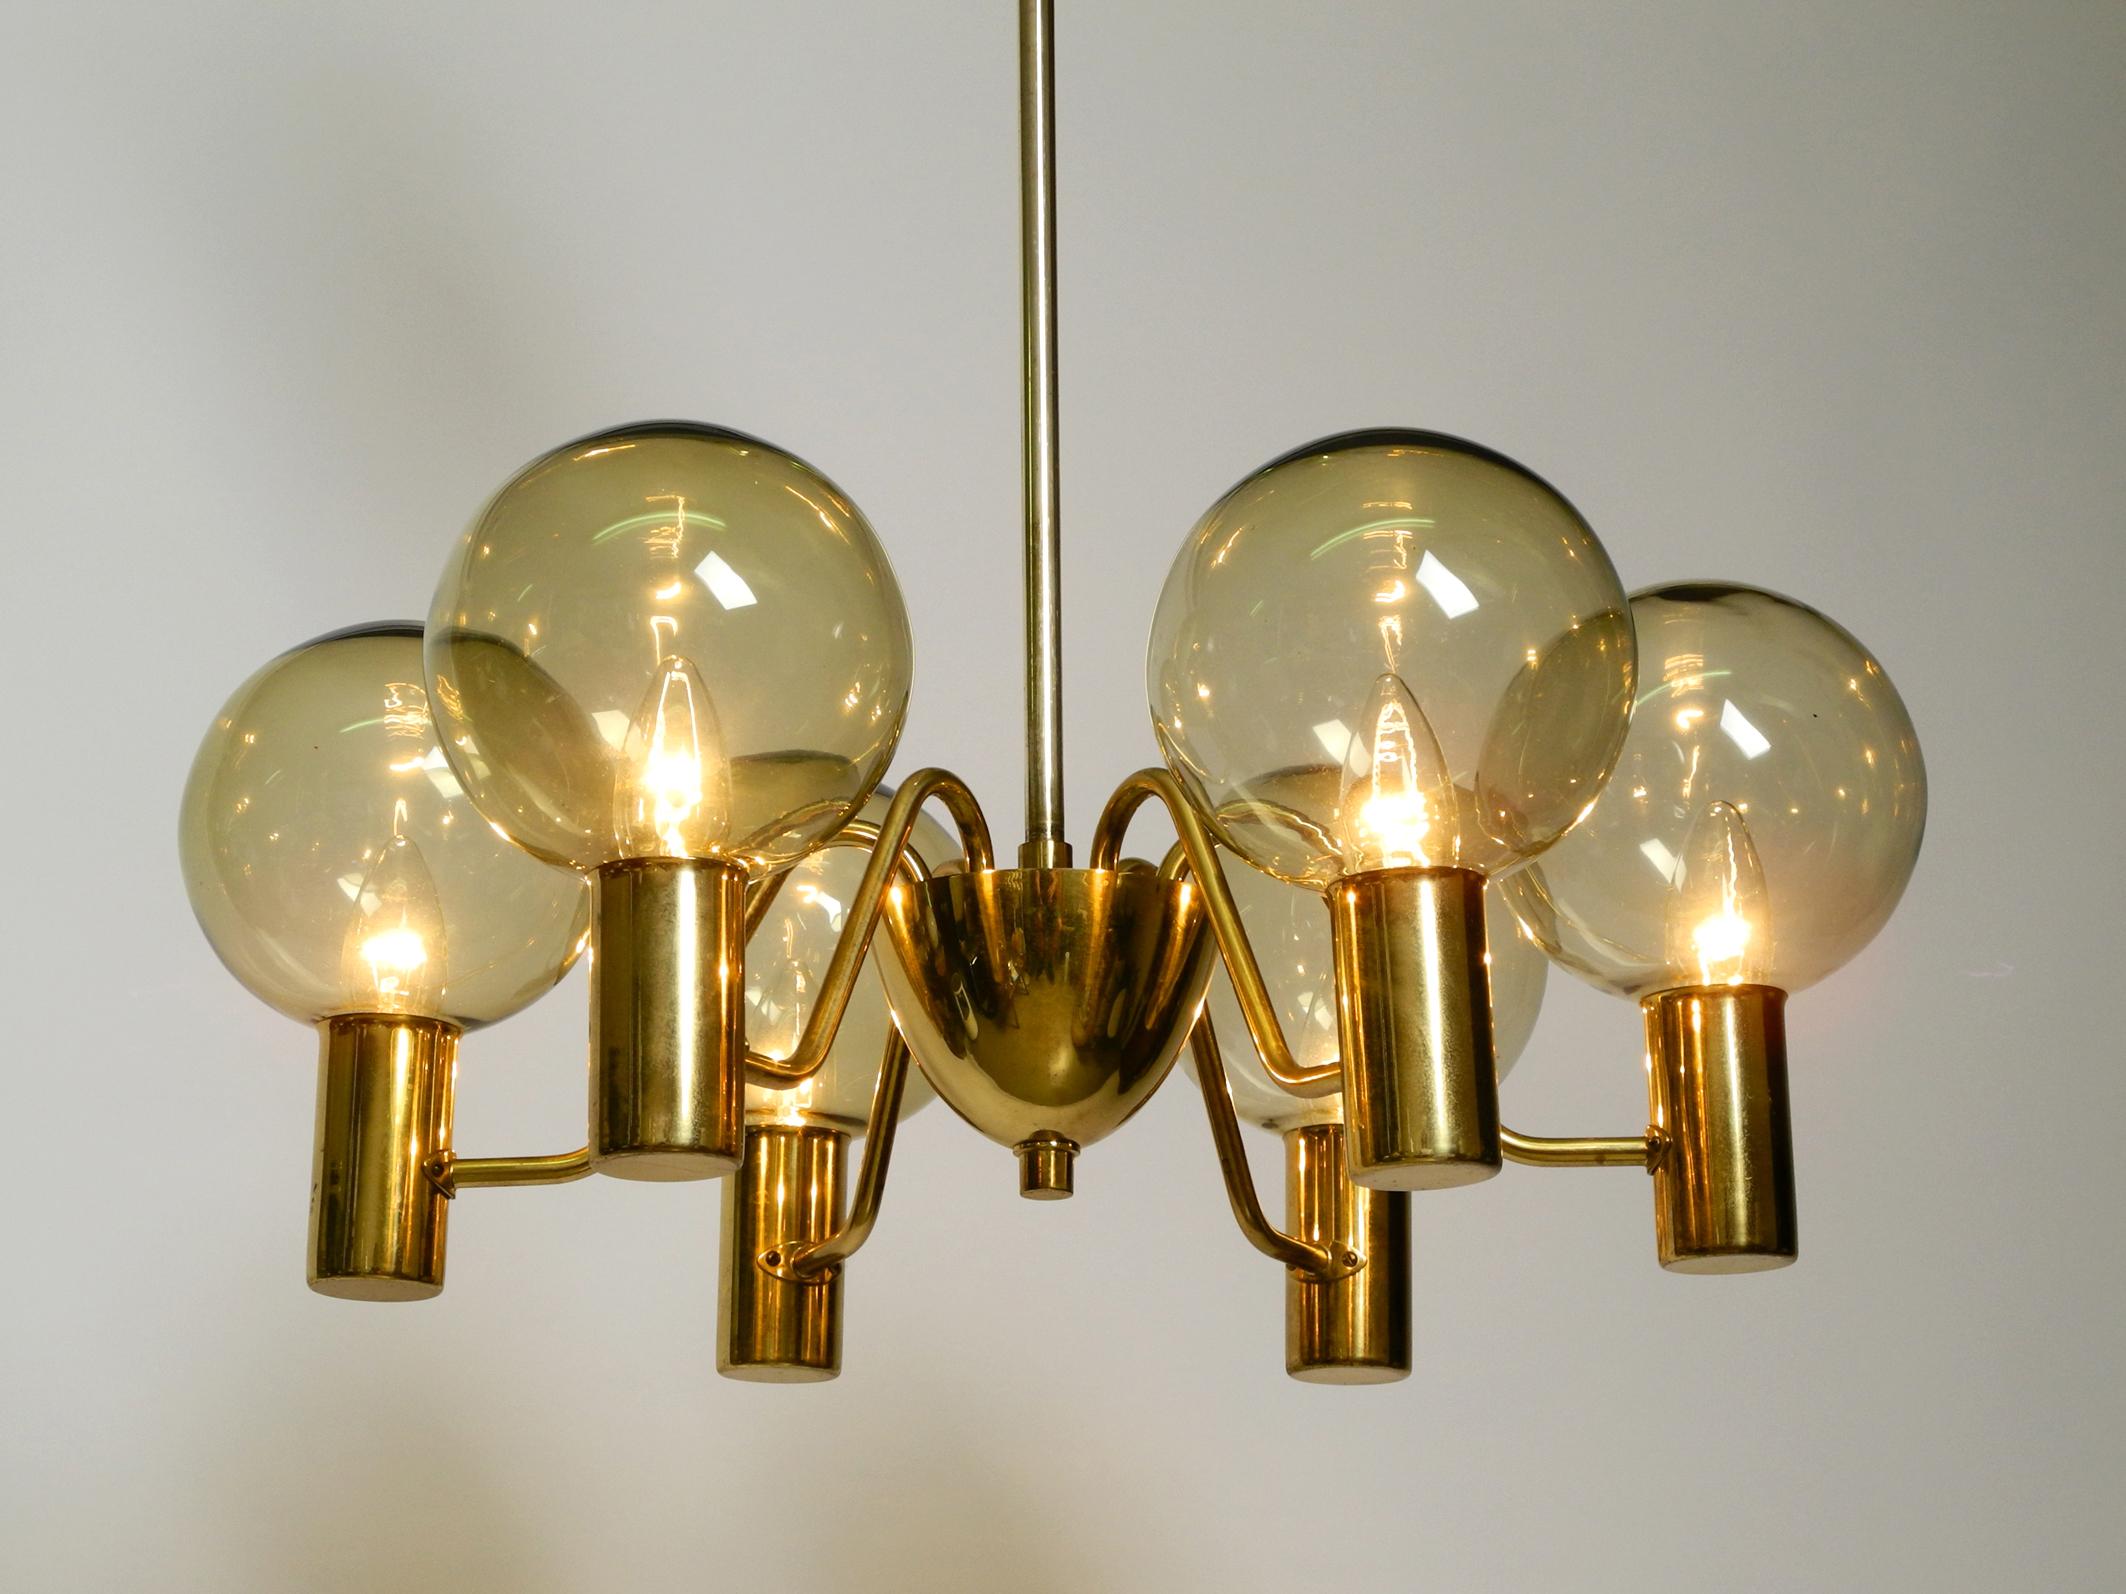 Beautiful 1960s brass ceiling lamp with 6 arms.
Design by Hans Agne Jakobsson Model T 372/6 'Patricia'
Manufacturer is Markaryd. Made in Sweden.
Glass globes in golden color. Entire lamp, canopy and rod are in polished brass.
Fantastically